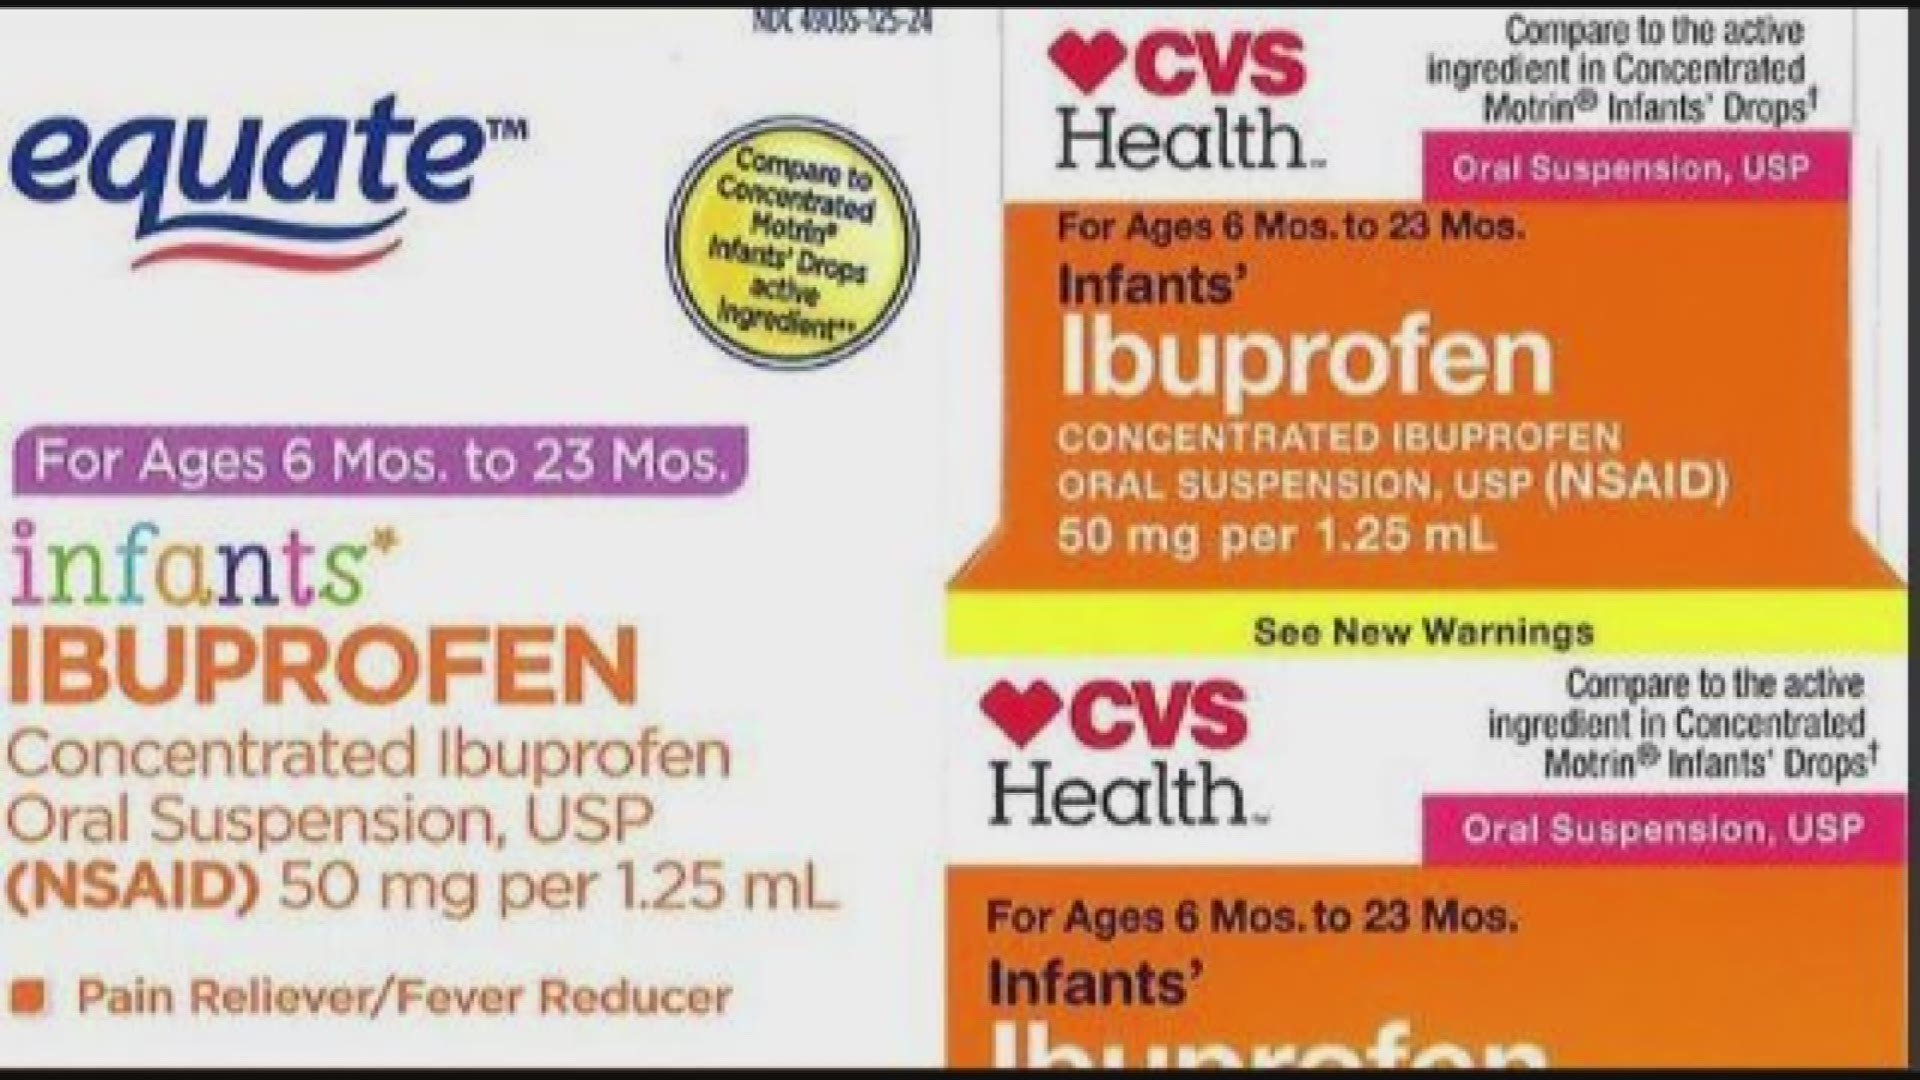 Tris Pharma, Inc. is expanding its recall of infants’ ibuprofen to include three additional lots of Ibuprofen Oral Suspension Drops, USP, 50 mg per 1.25 mL. https://kare11.tv/2HFU524